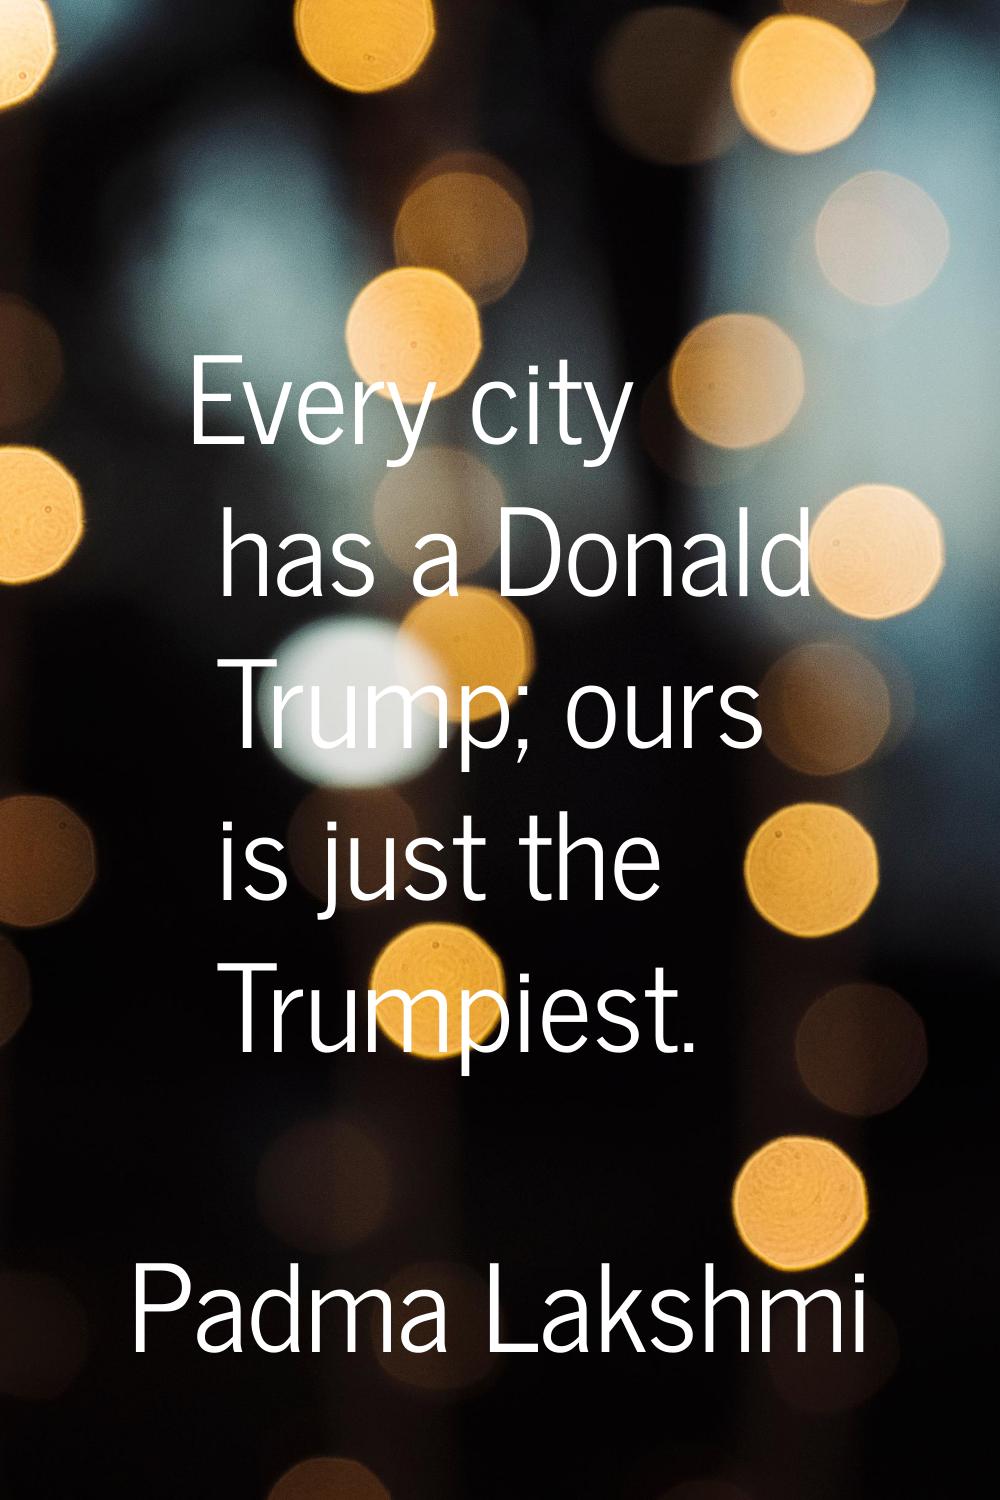 Every city has a Donald Trump; ours is just the Trumpiest.